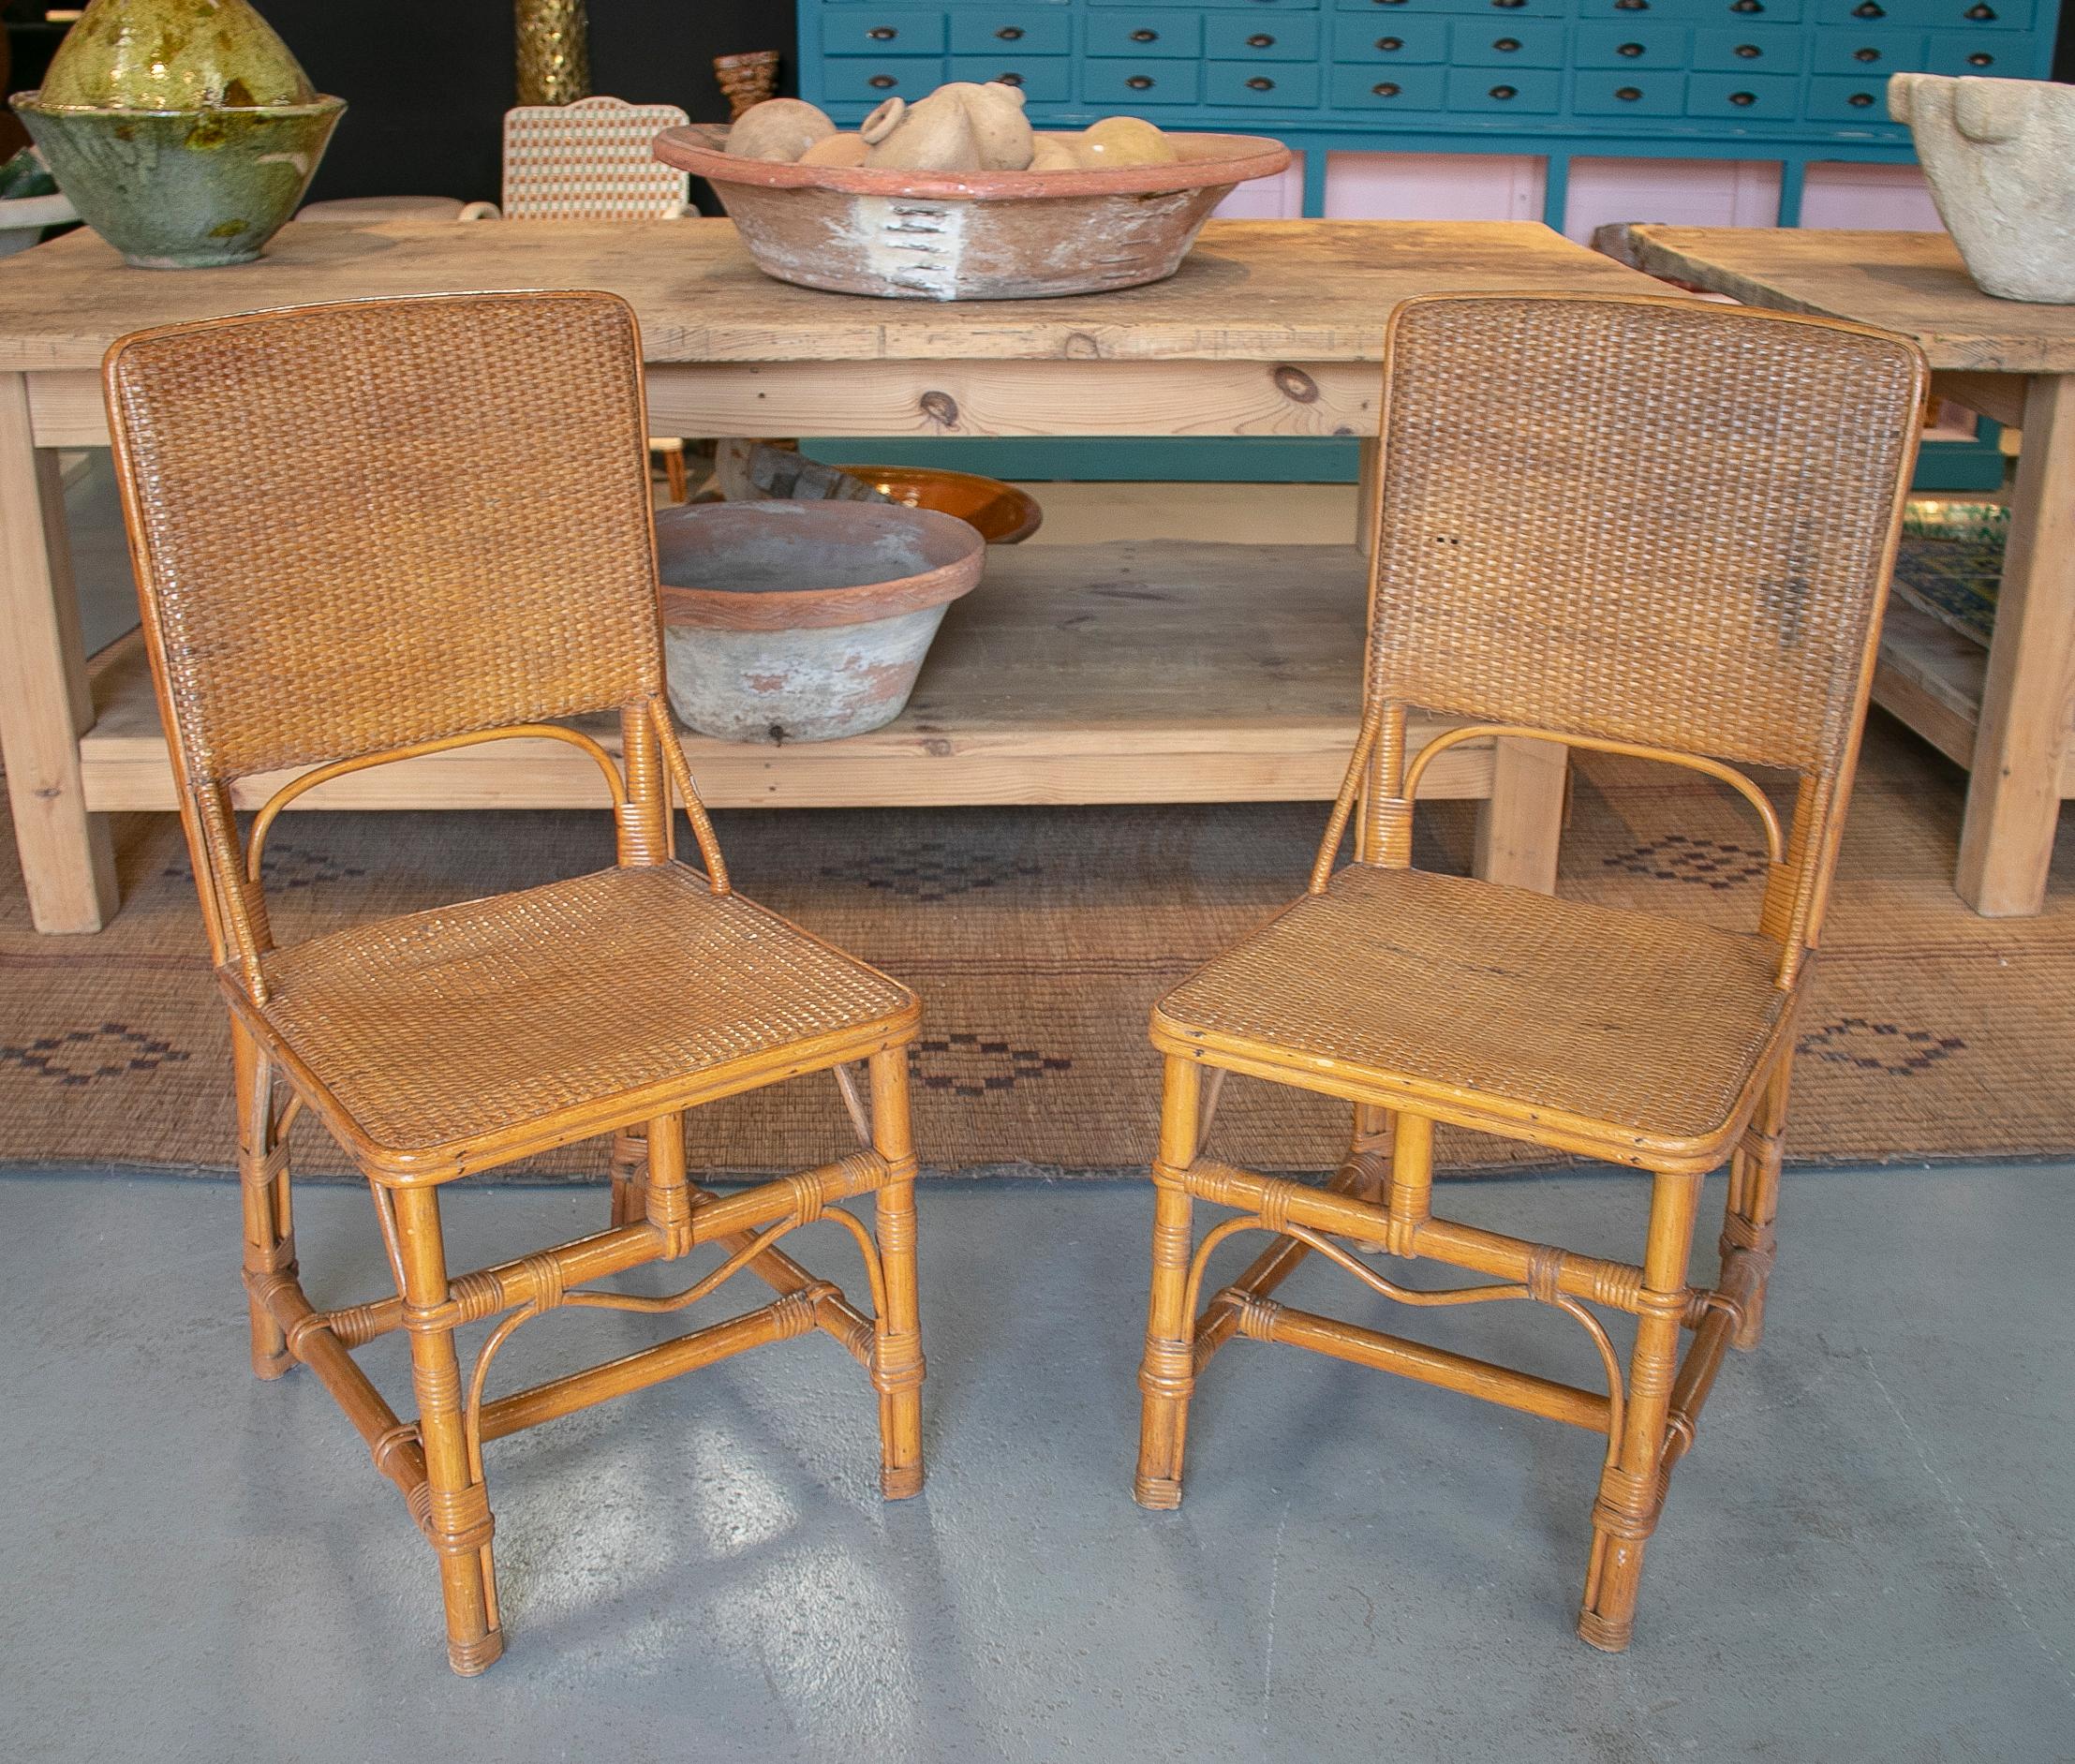 Pair of 1970s Spanish bamboo and hand woven wicker chairs.